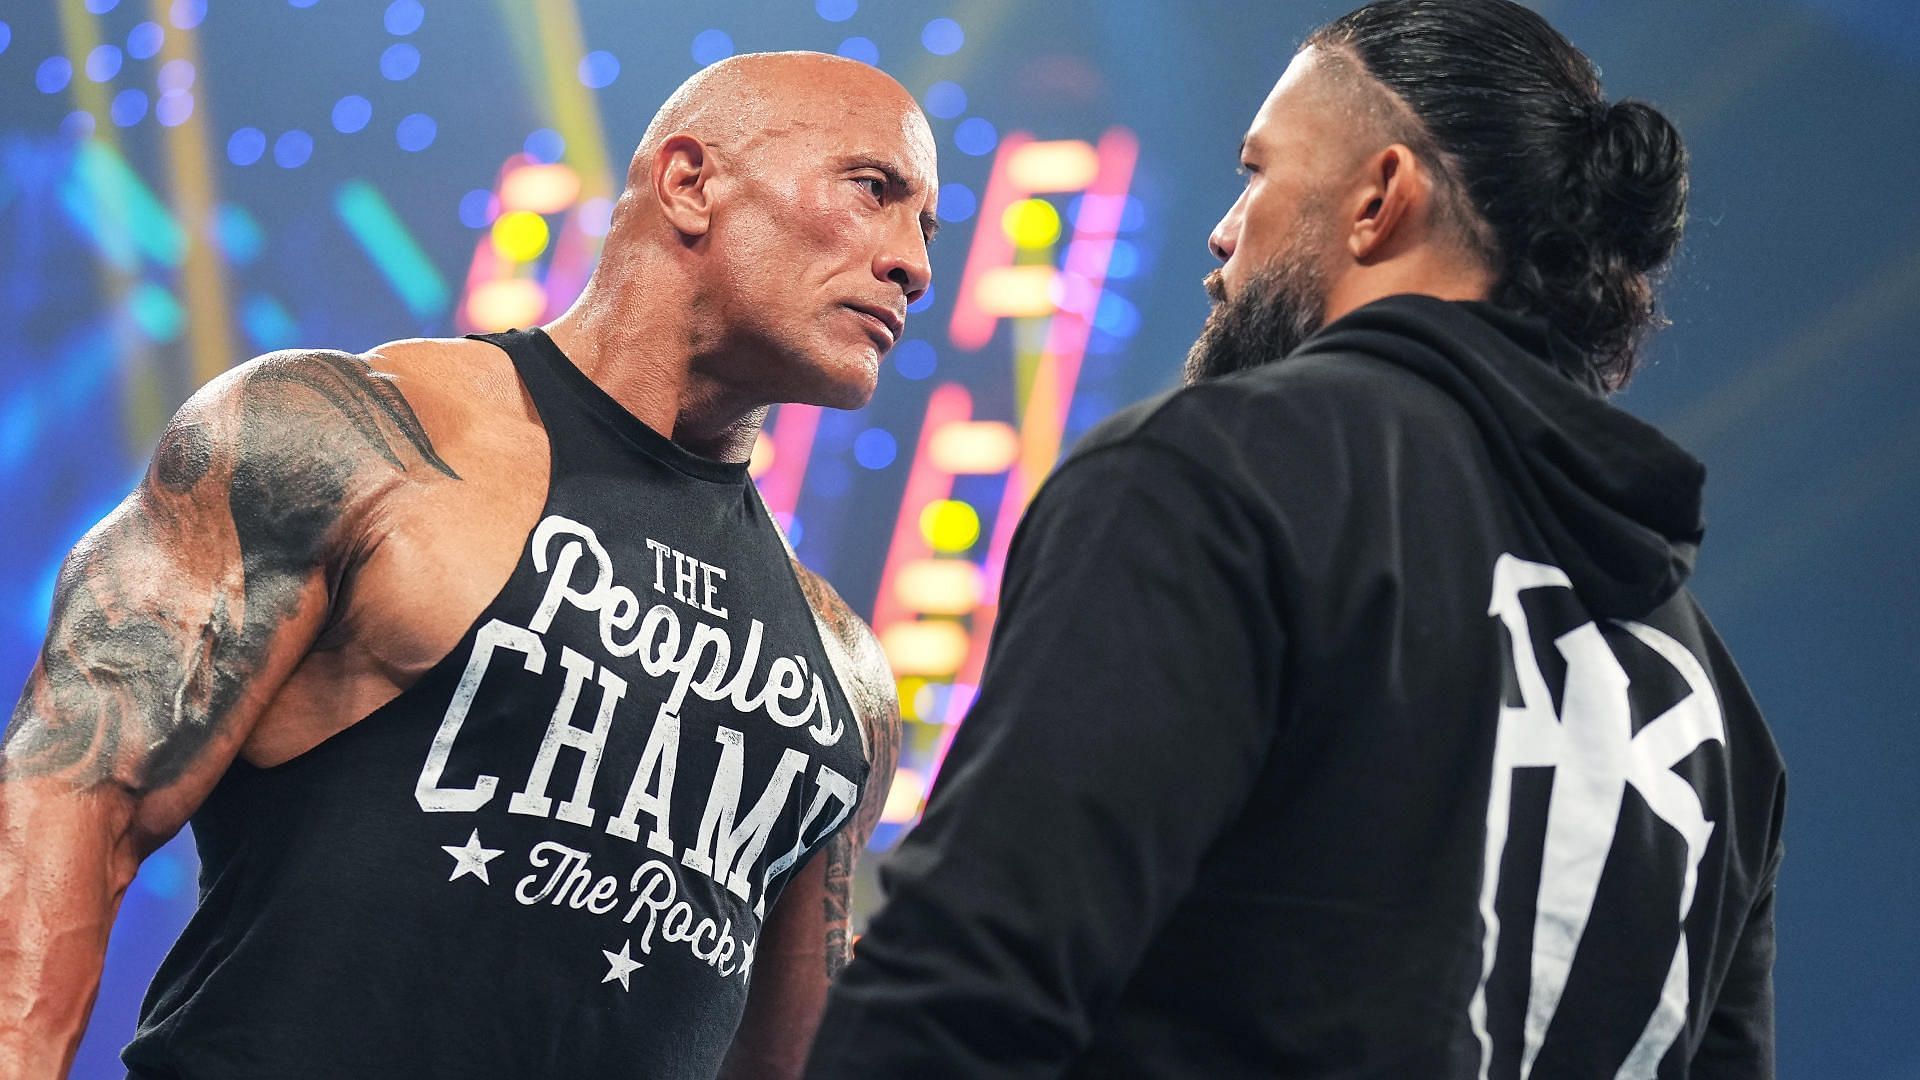 The Rock and Roman Reigns in a moment for the ages on SmackDown!